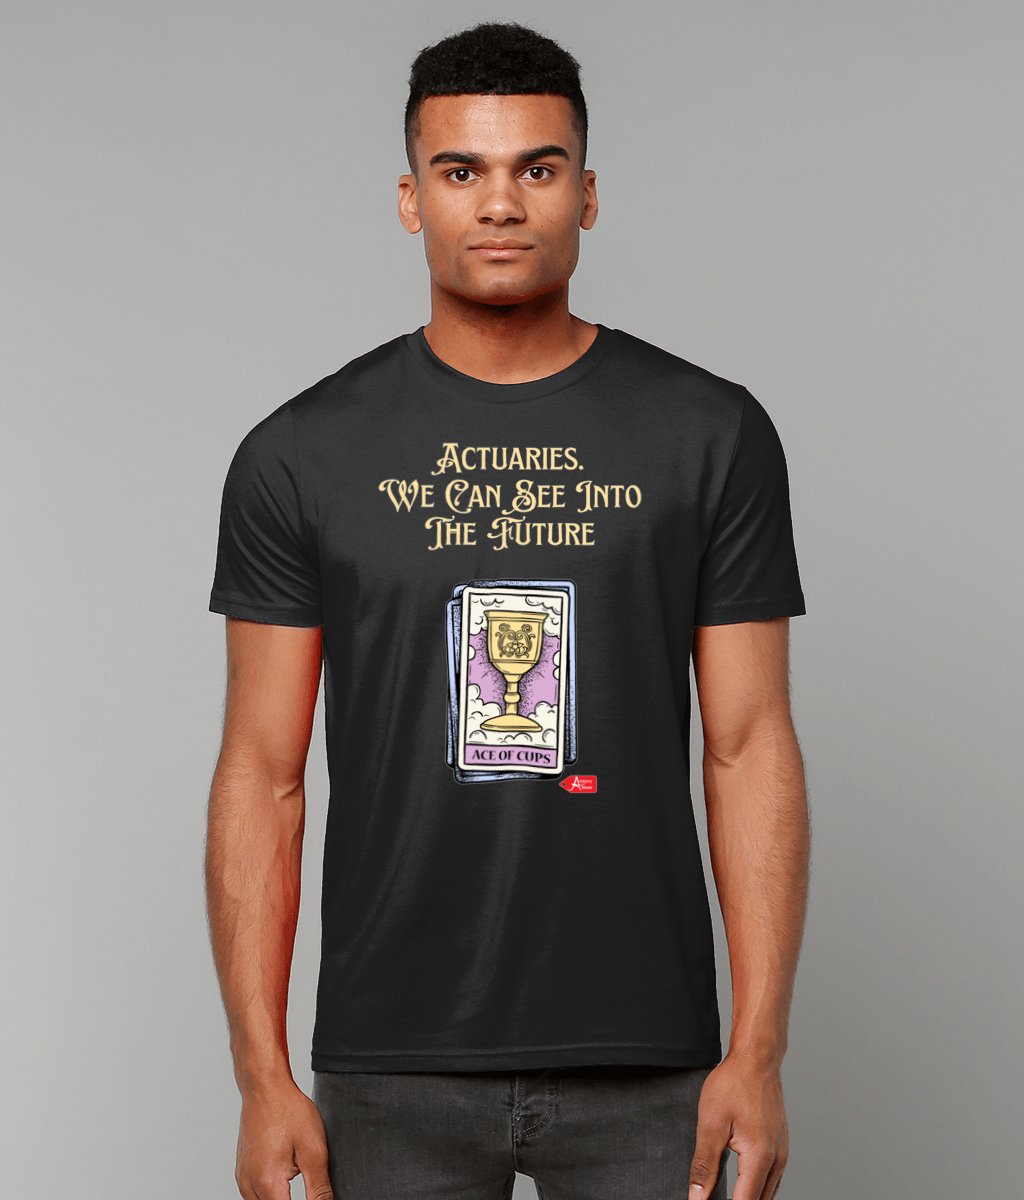 Actuaries - We Can See Into The Future Halloween T-shirt